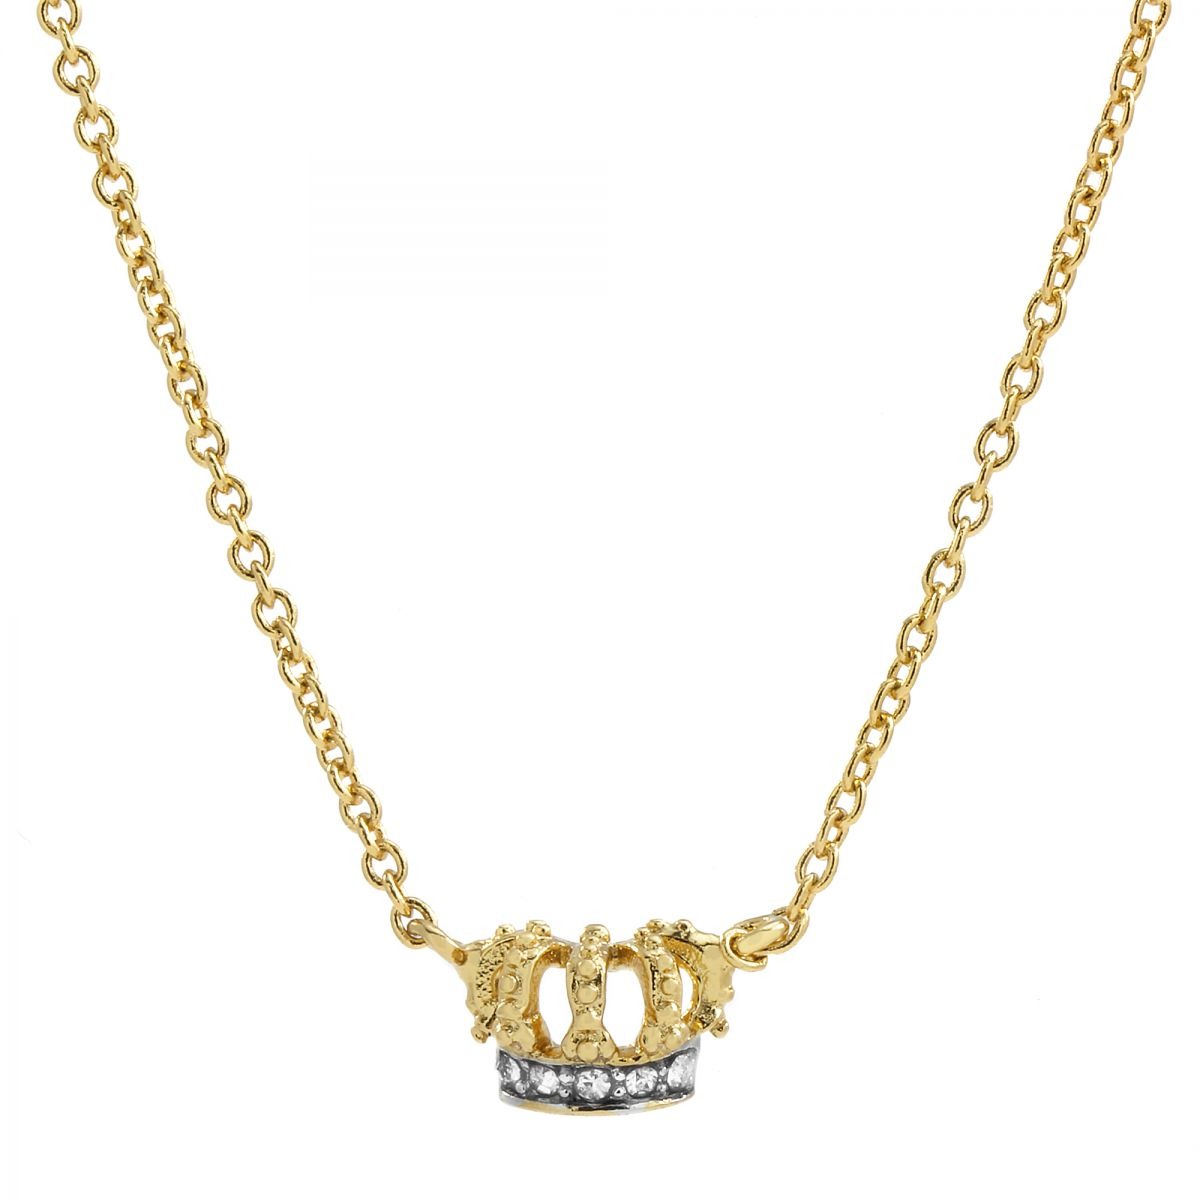 Necklace in Gold Watch Shop - Juicy Couture GOOFASH